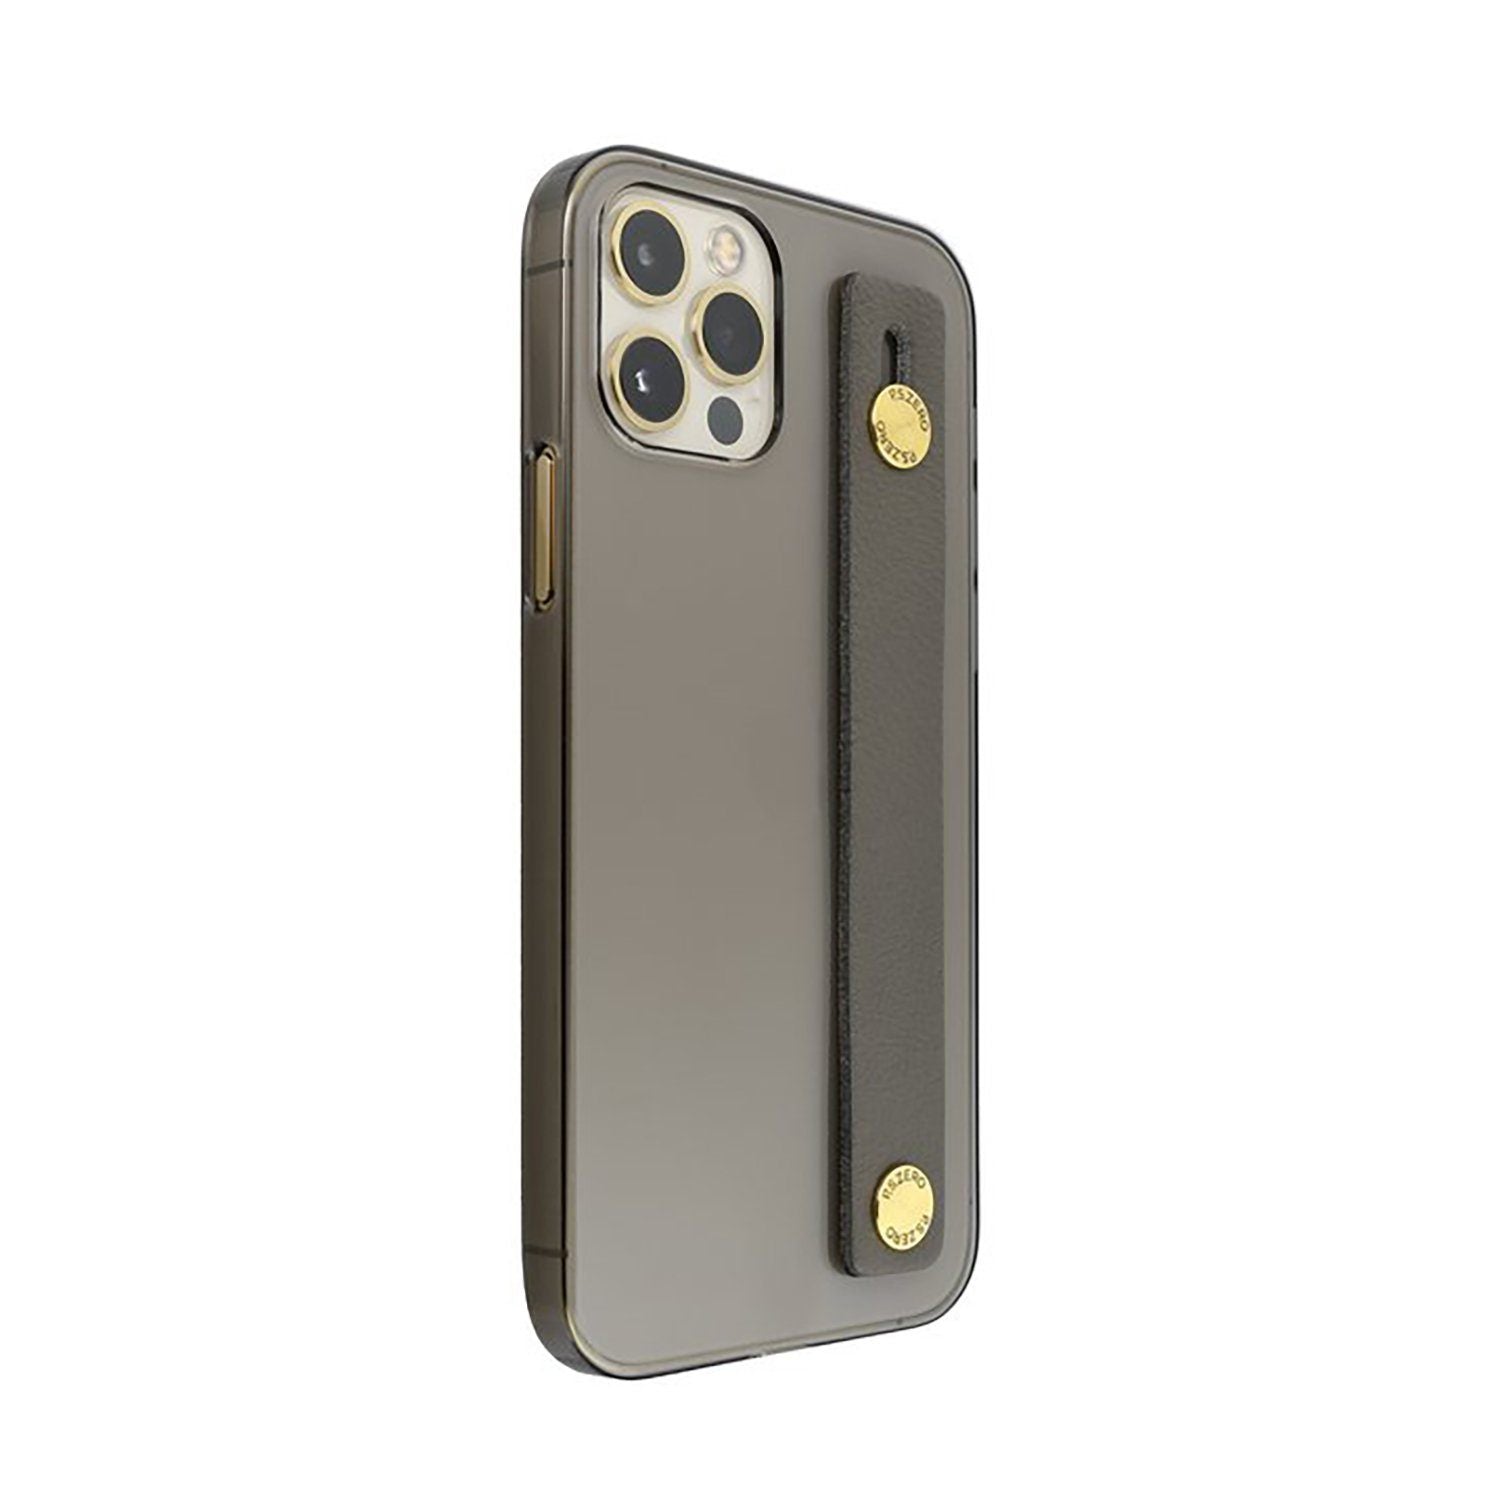 Power Support AirJacket Leather Band case for iPhone 12 Pro Max 6.7'', Gray Default Power Support 